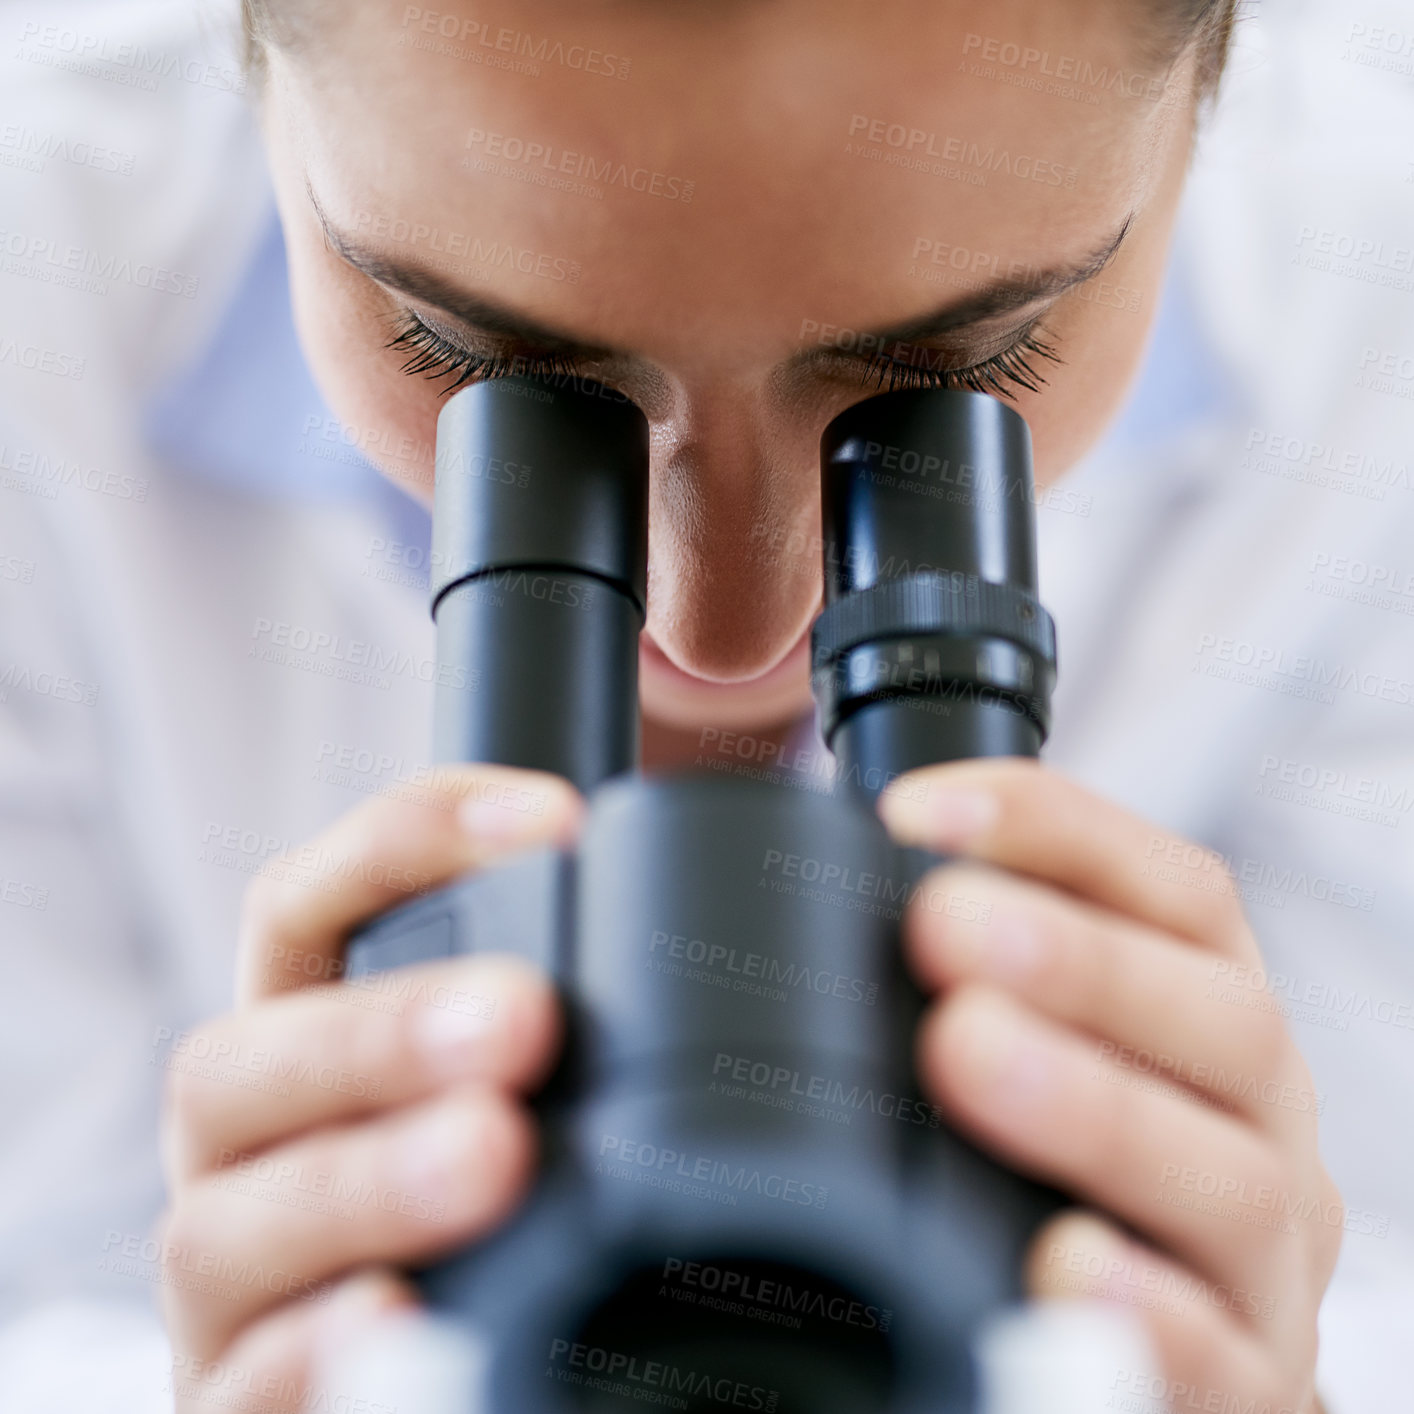 Buy stock photo Cropped shot of a young female scientist using a microscope in a lab